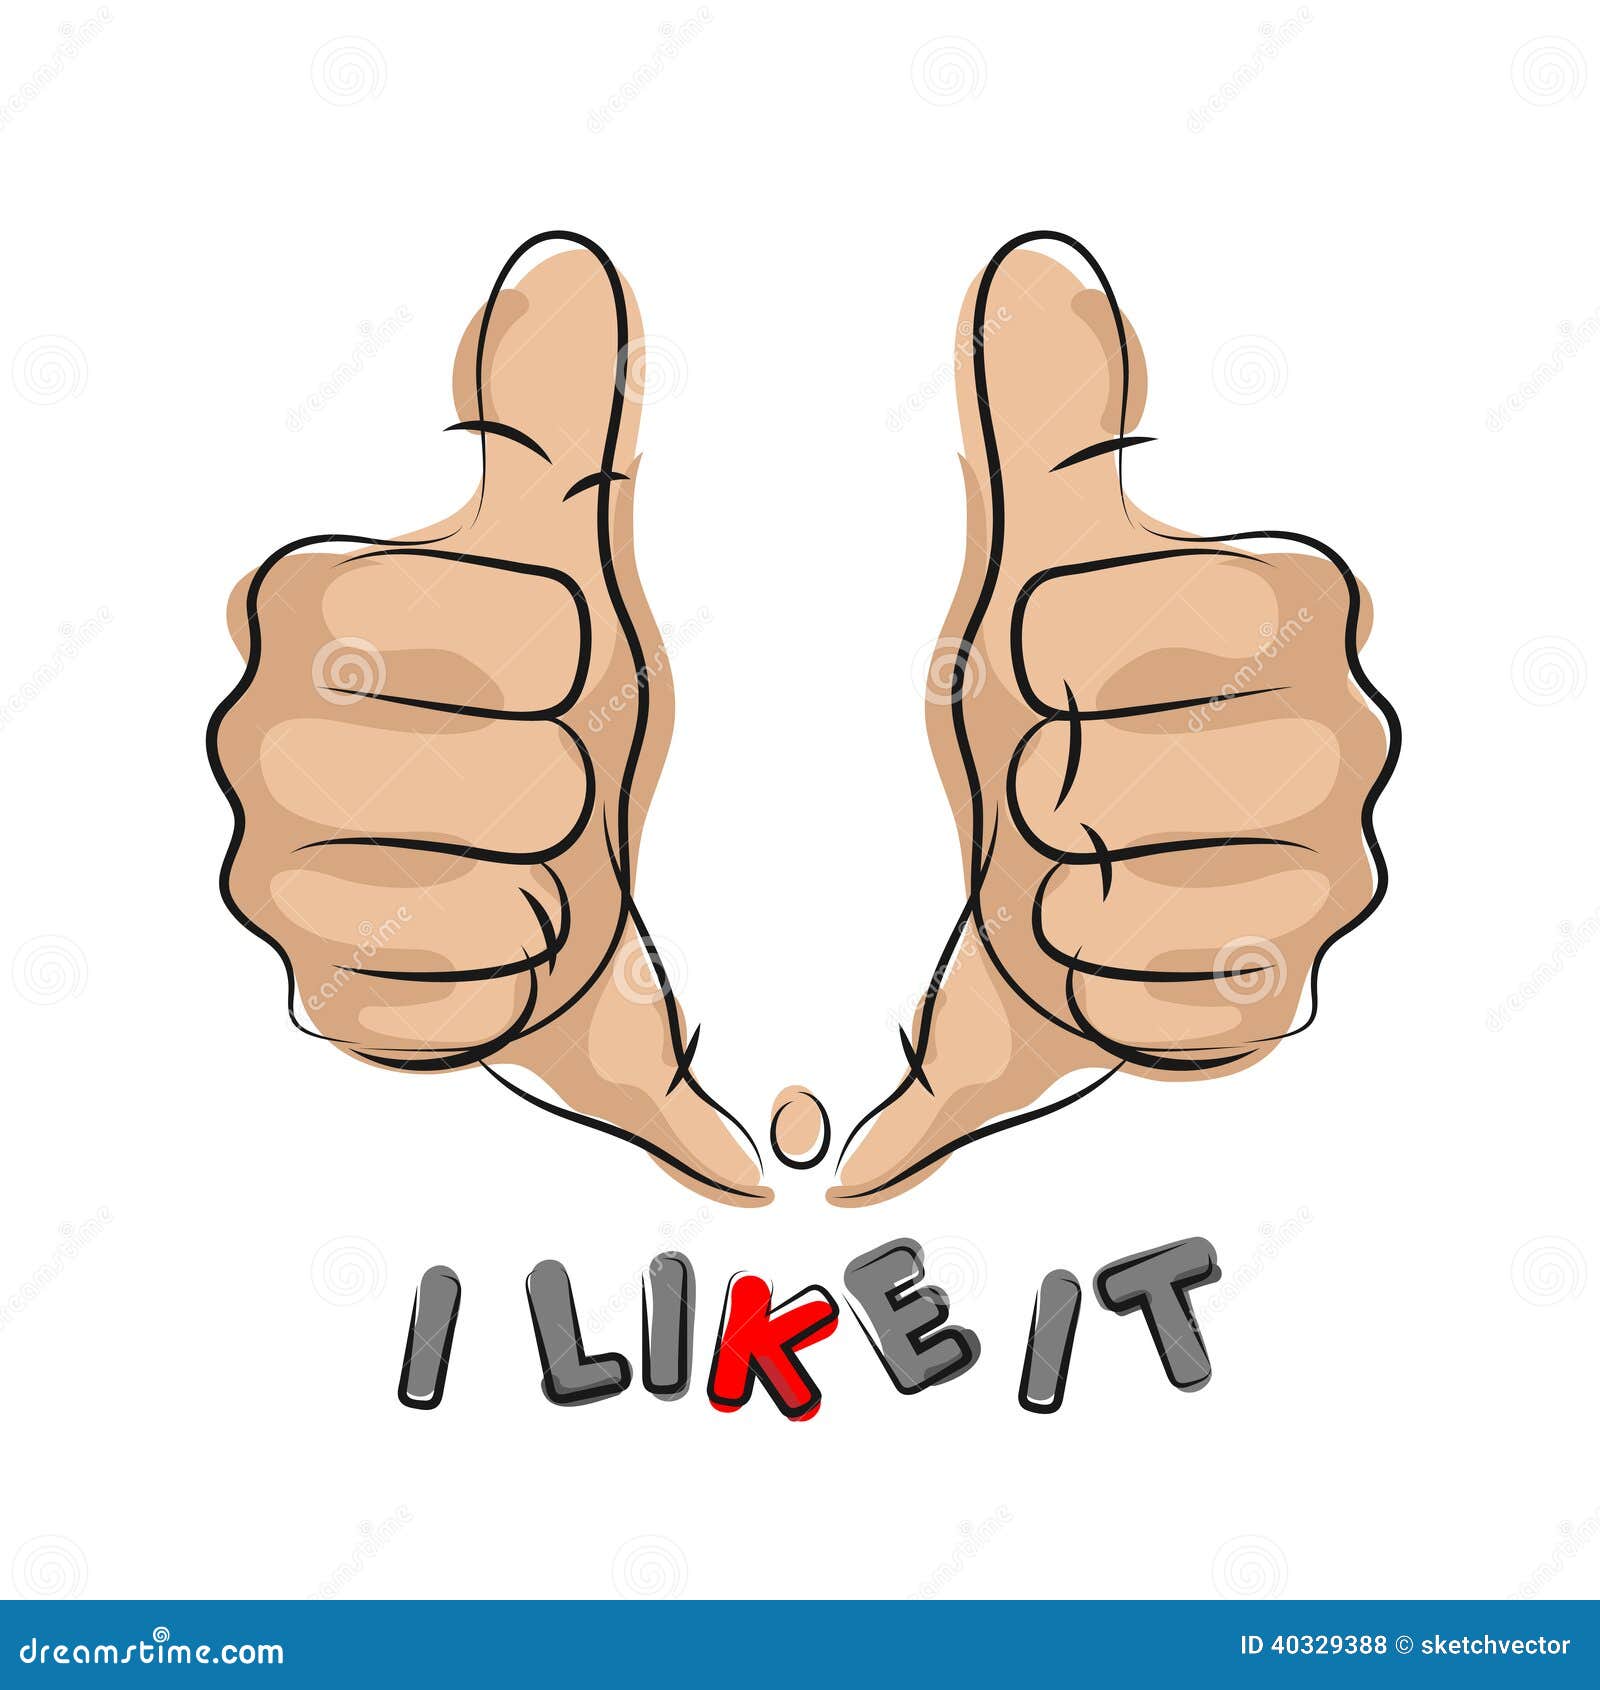 Two Thumbs Up Stock Vector - Image: 40329388